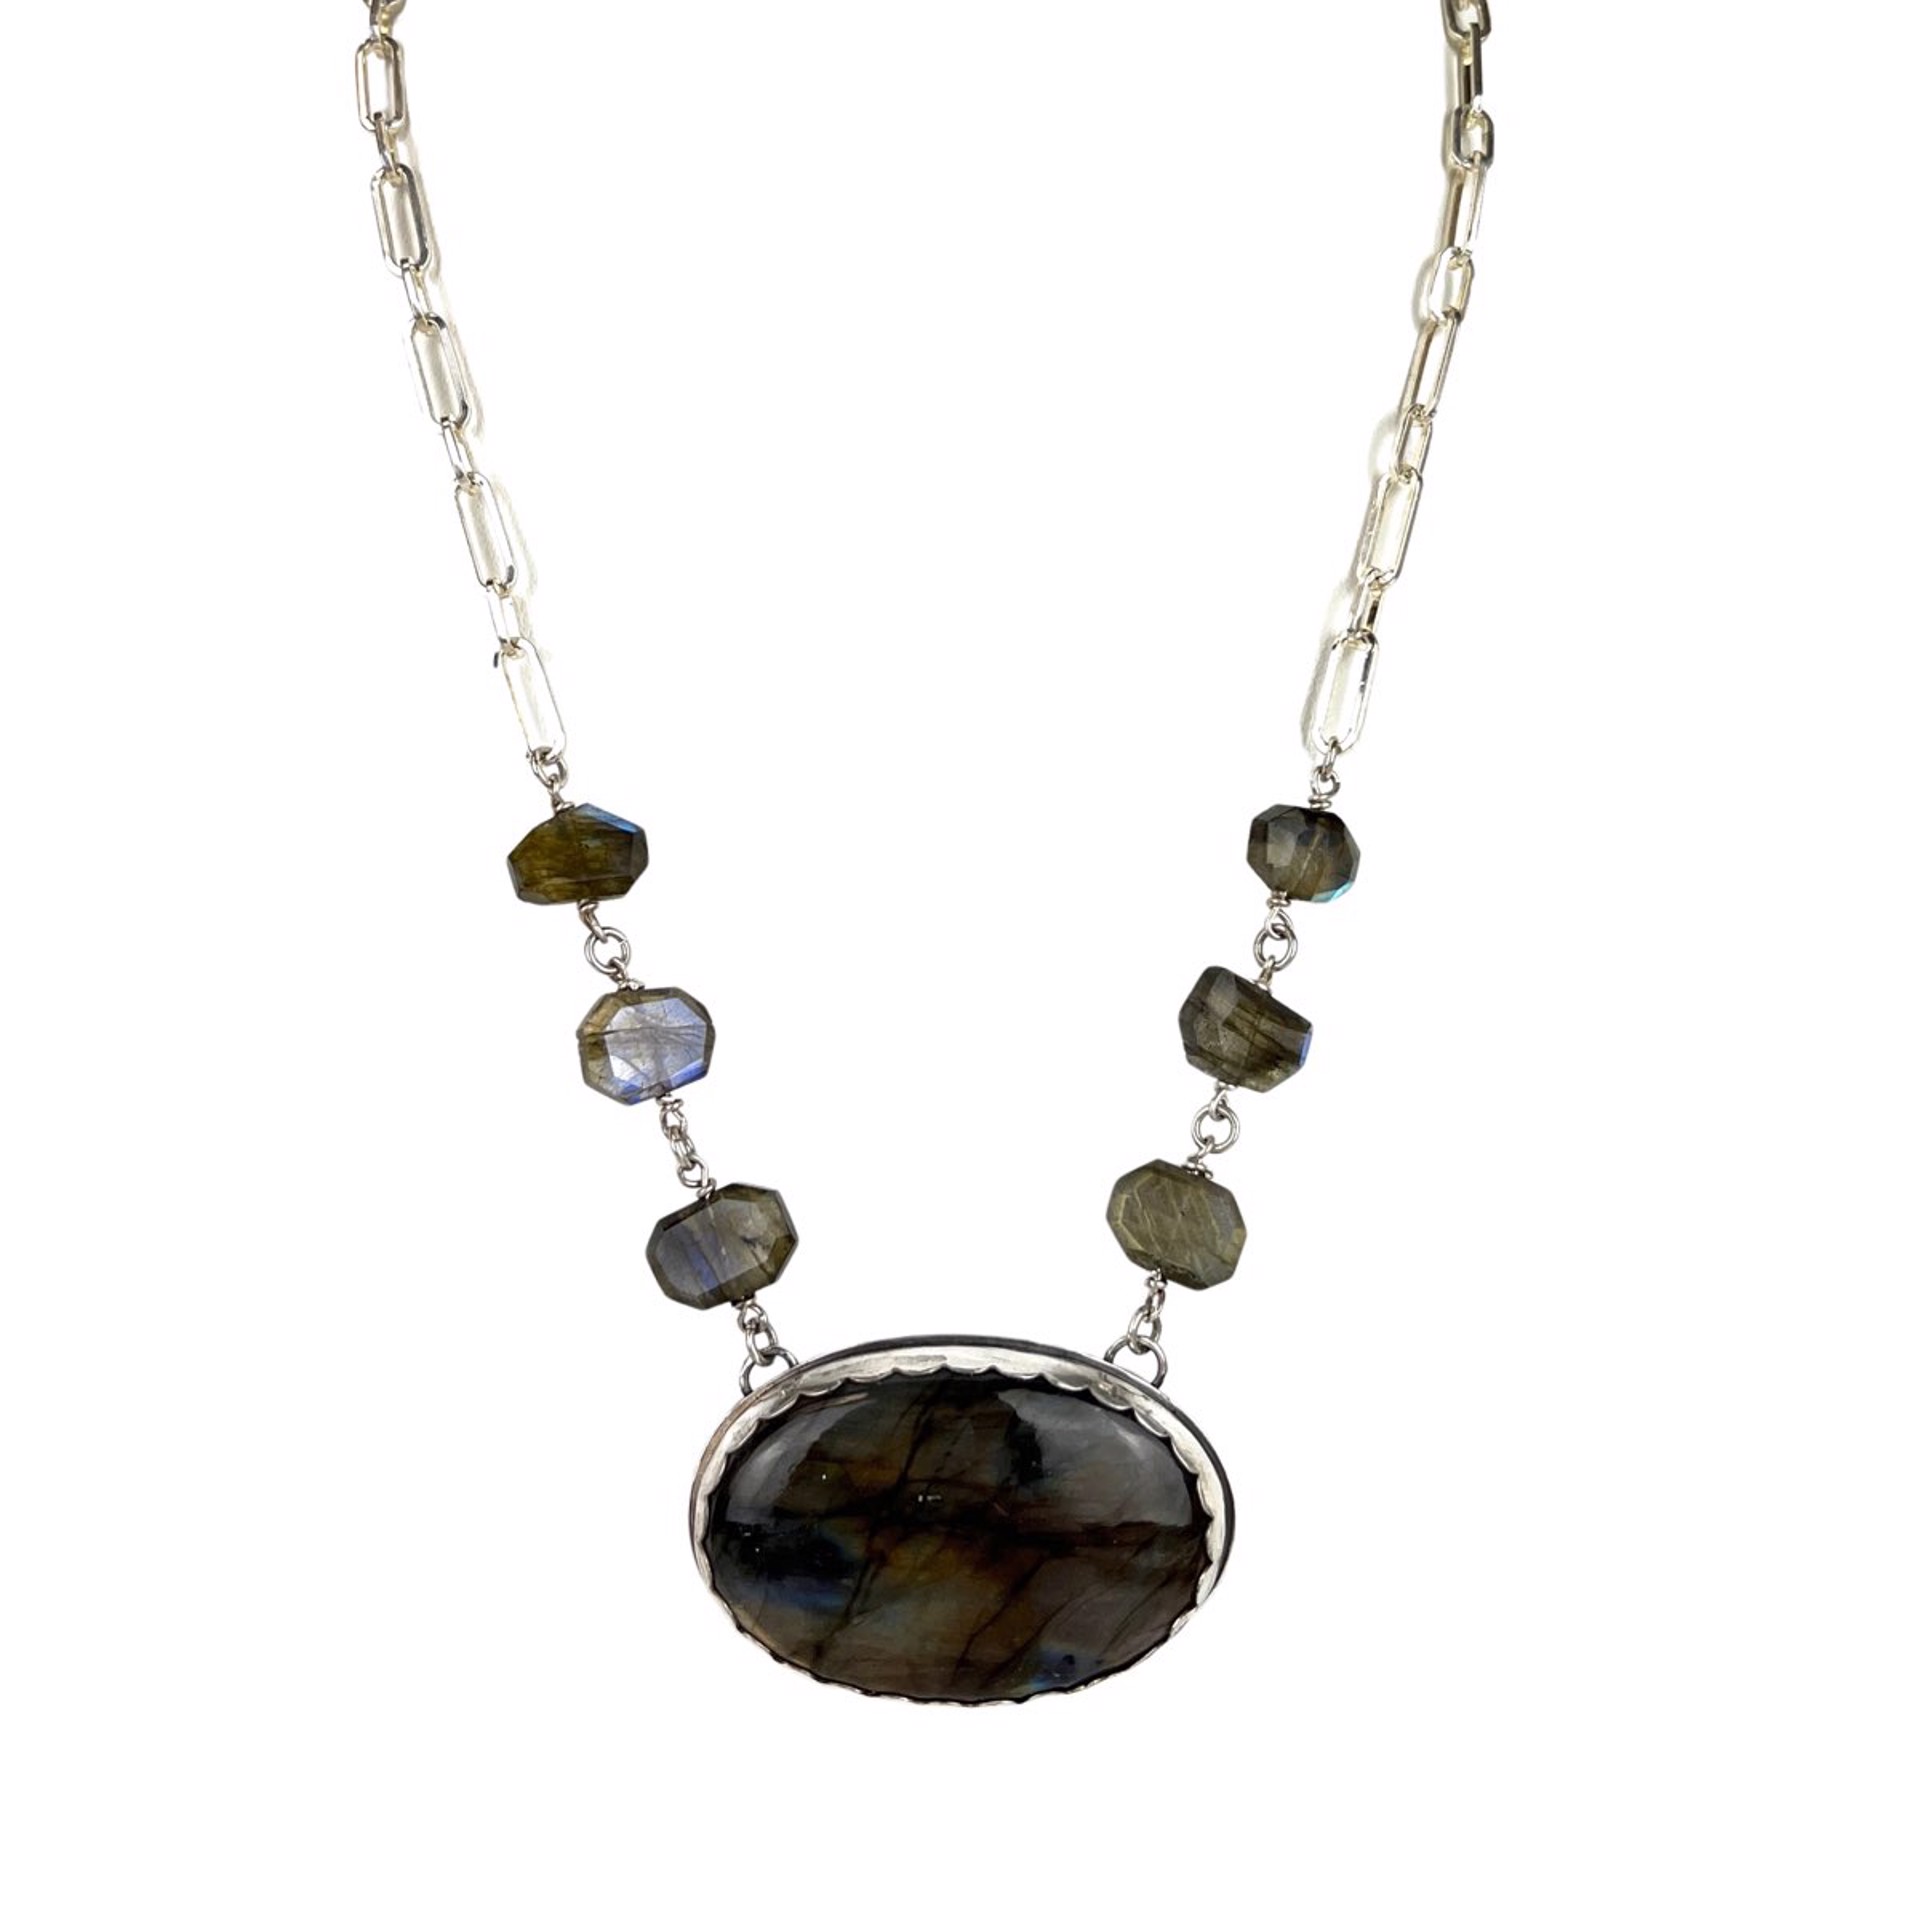 Labradorite and Sterling Silver Necklace by Nola Smodic